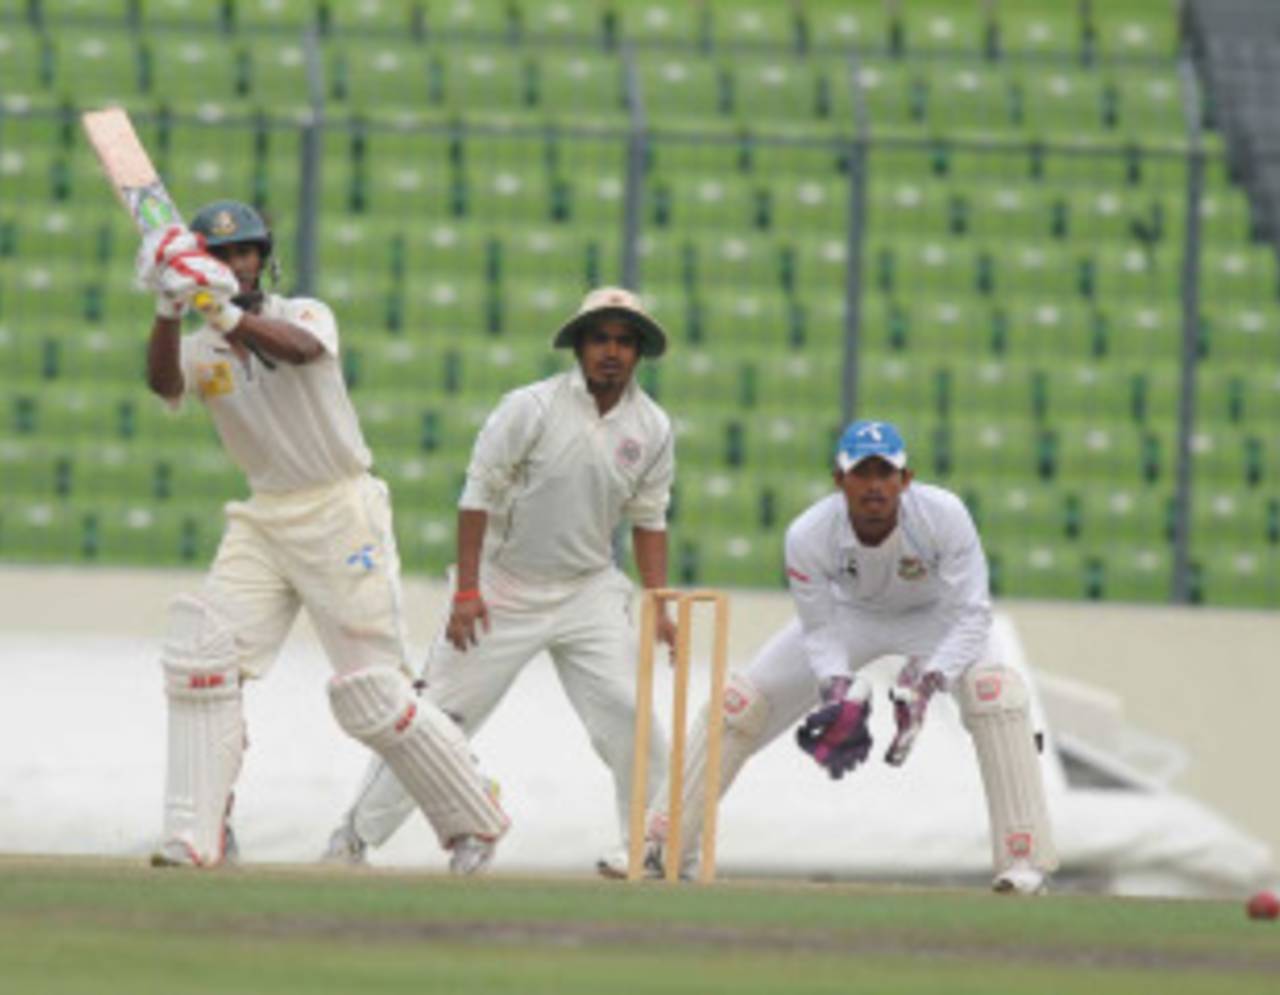 The NCL may be Bangladesh's first-class competition, but it plays second fiddle to the Dhaka leagues&nbsp;&nbsp;&bull;&nbsp;&nbsp;BCB